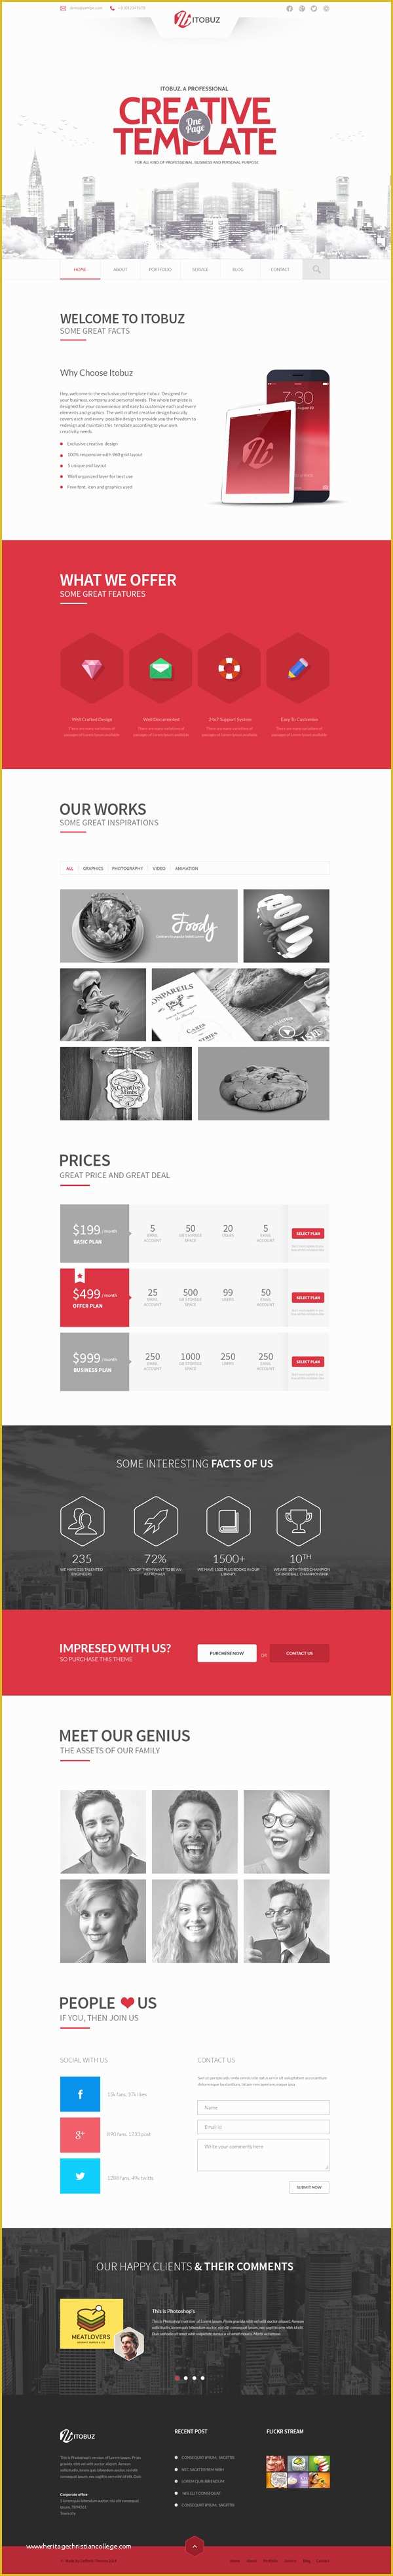 Single Page Website Template Free Of 15 Best HTML5 Templates for Creative Corporate Portfolio